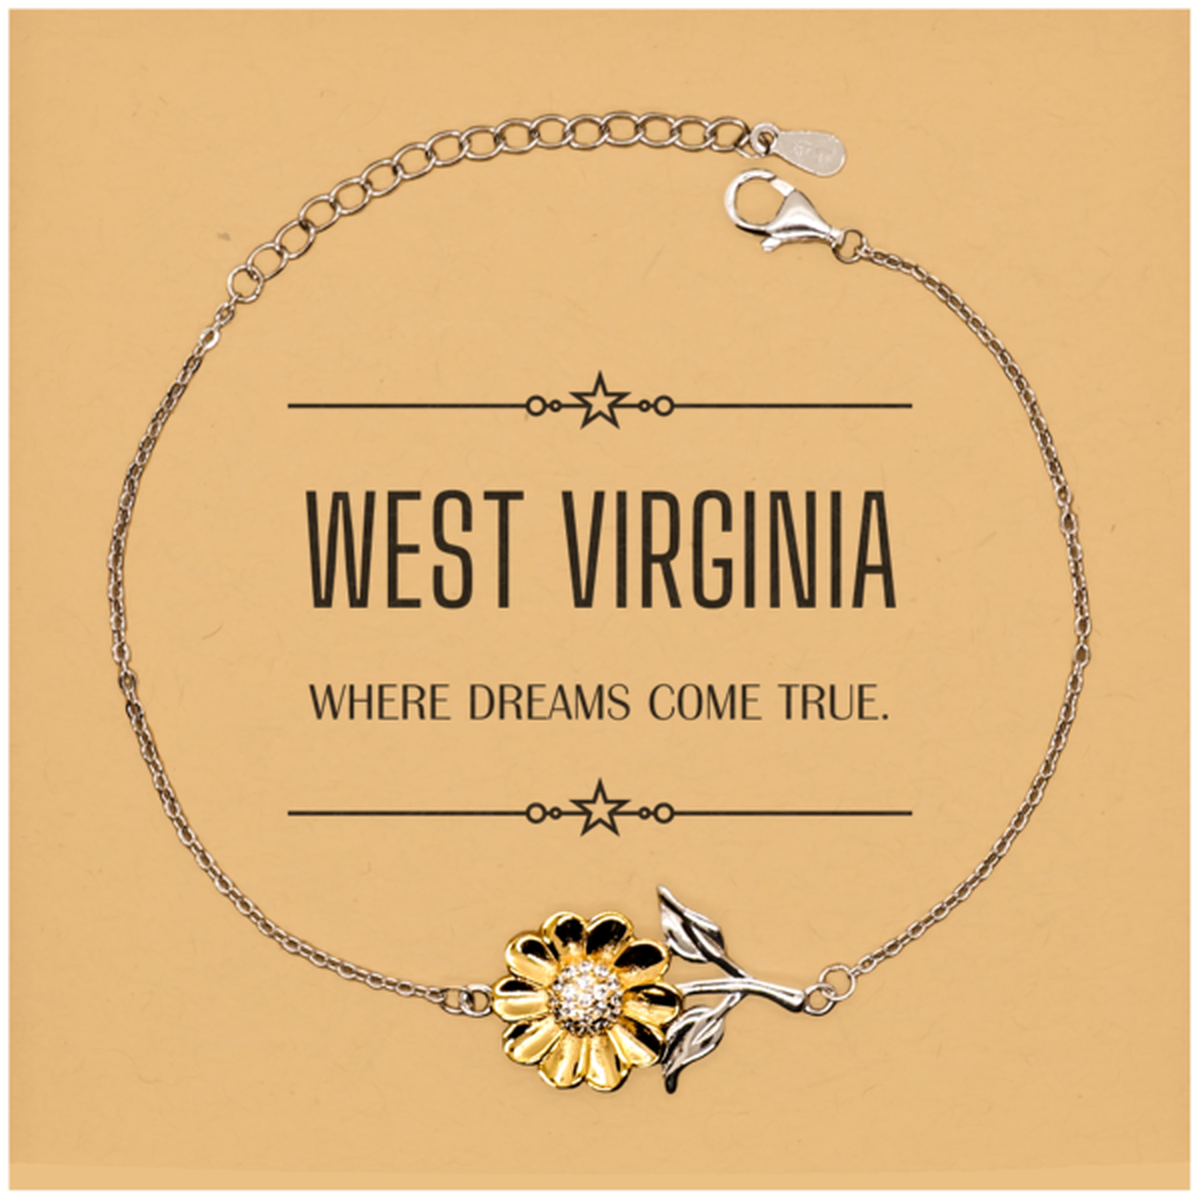 Love West Virginia State Sunflower Bracelet, West Virginia Where dreams come true, Birthday Christmas Inspirational Gifts For West Virginia Men, Women, Friends